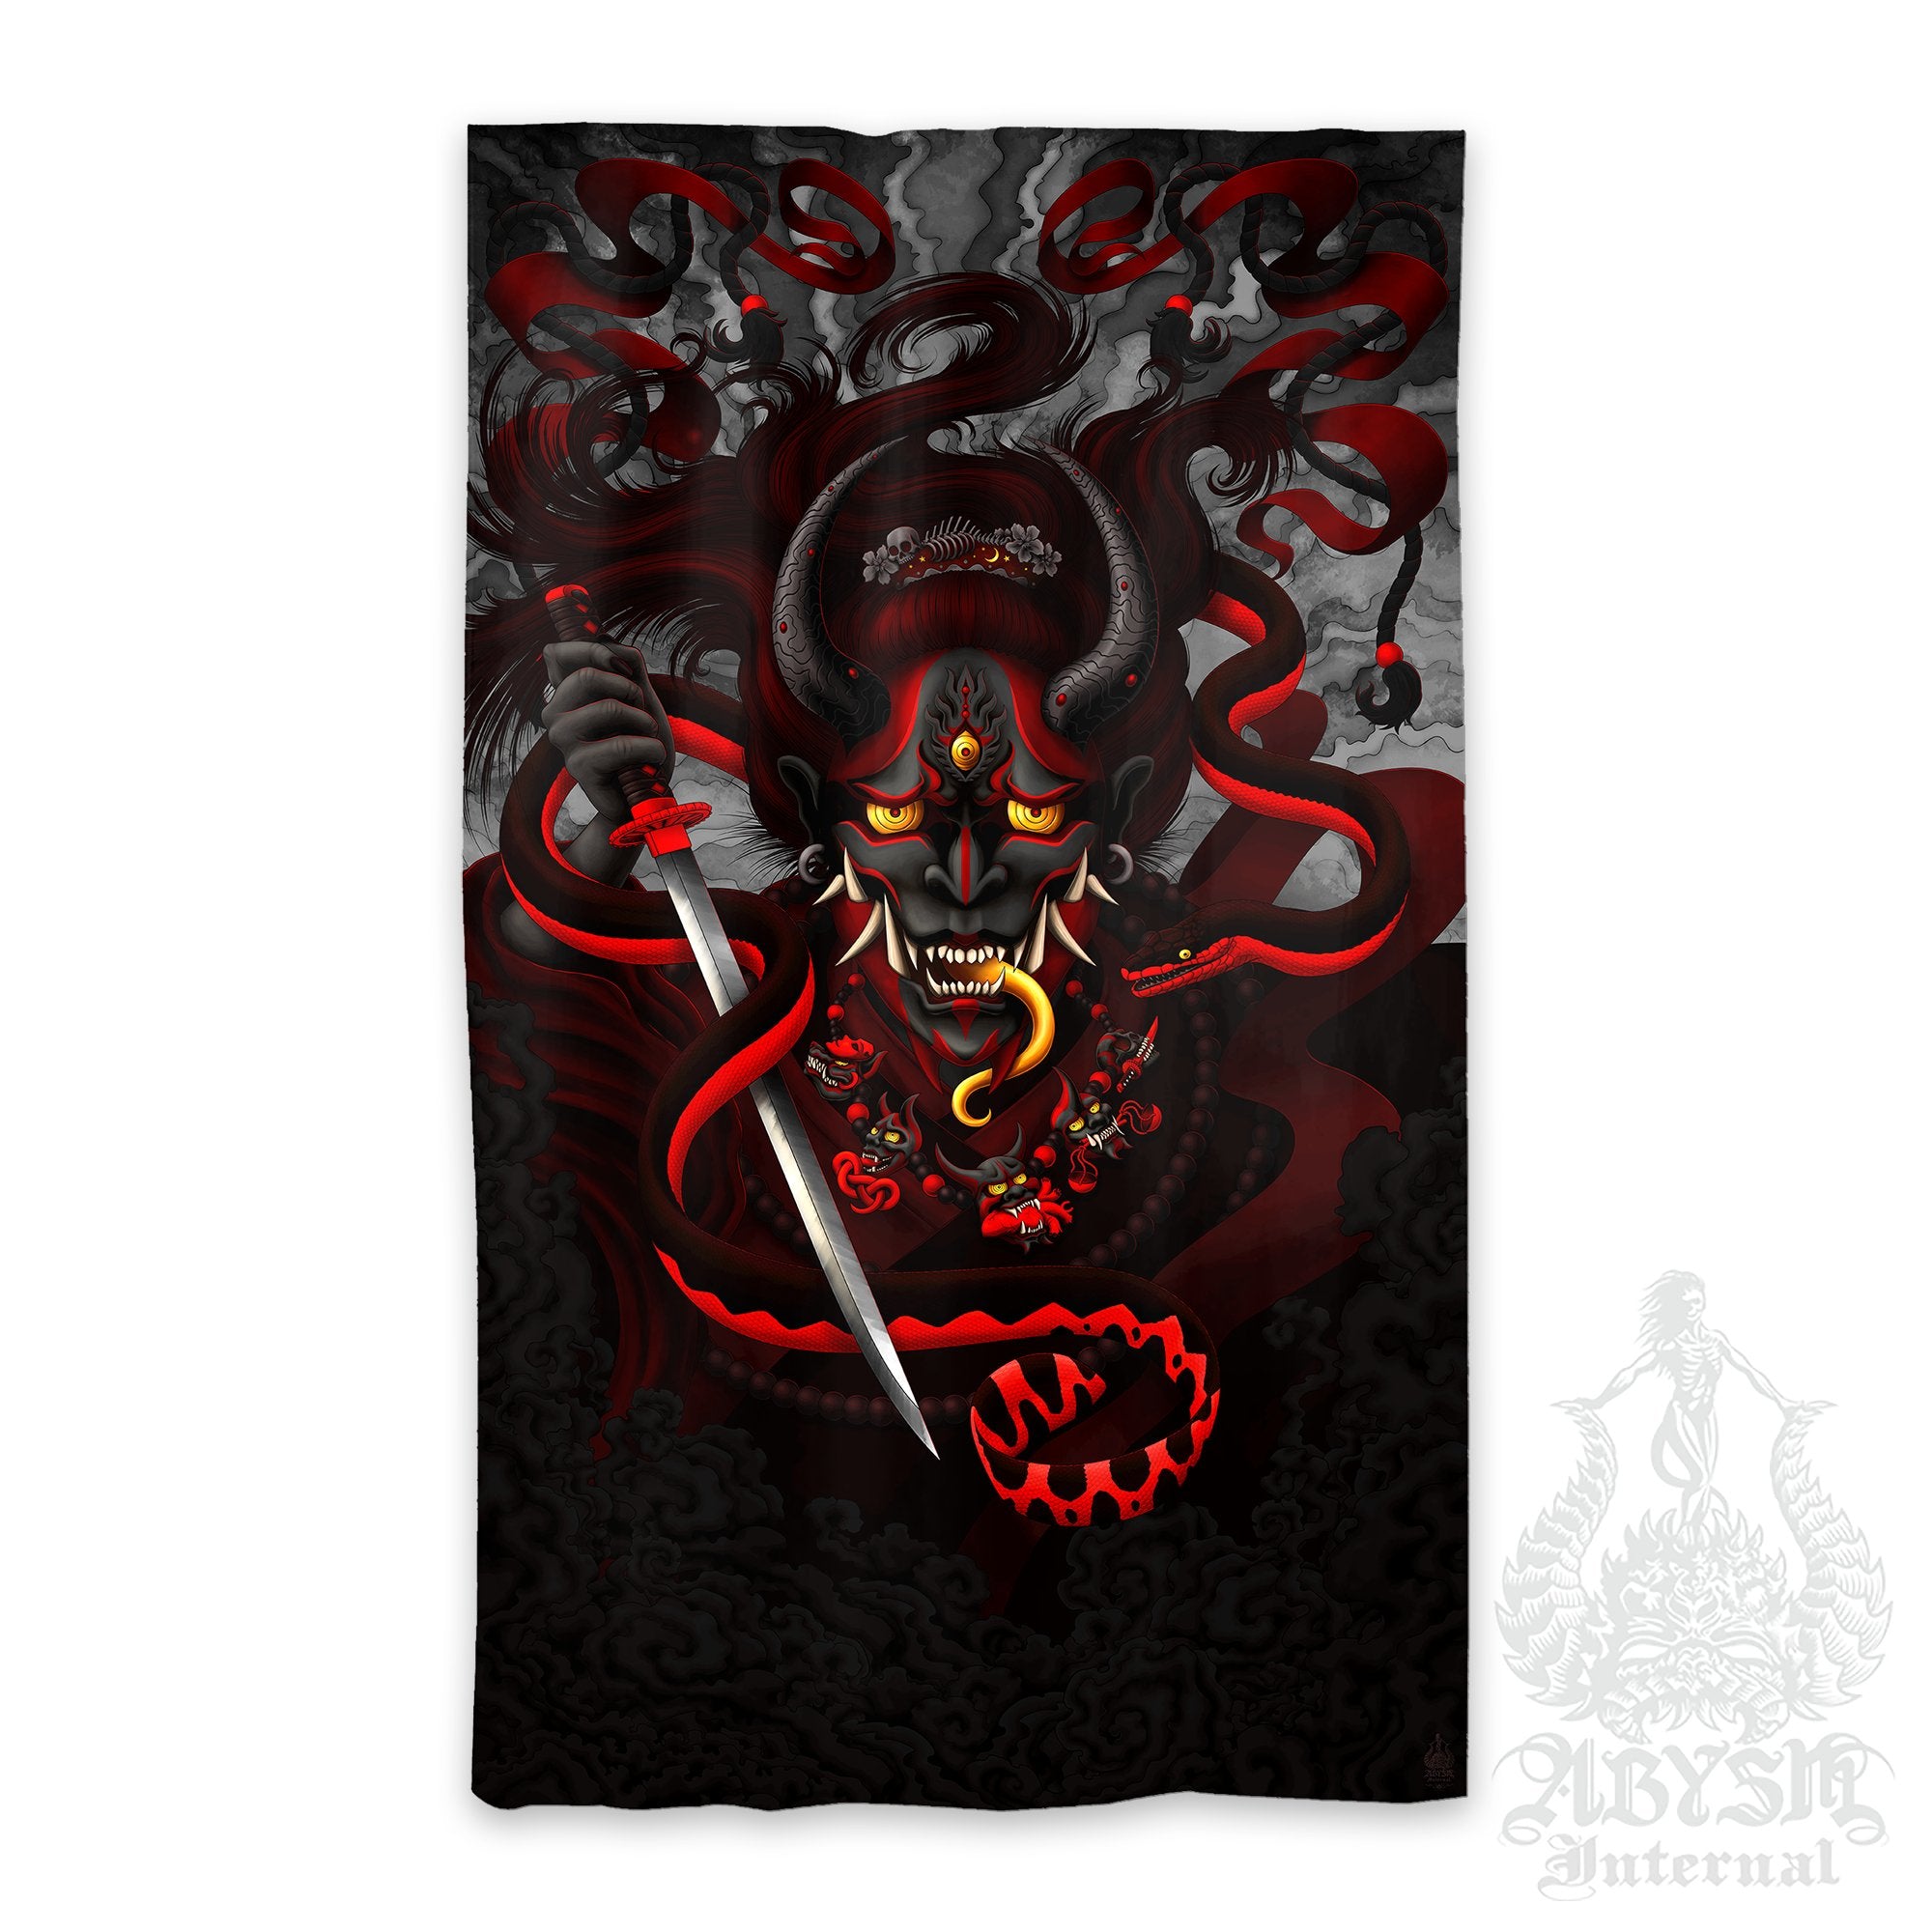 Gothic Japanese Demon Curtains, 50x84' Printed Window Panels, Hannya and Snake, Dark Fantasy Decor, Goth Anime and Game Room Art Print - Black Red - Abysm Internal